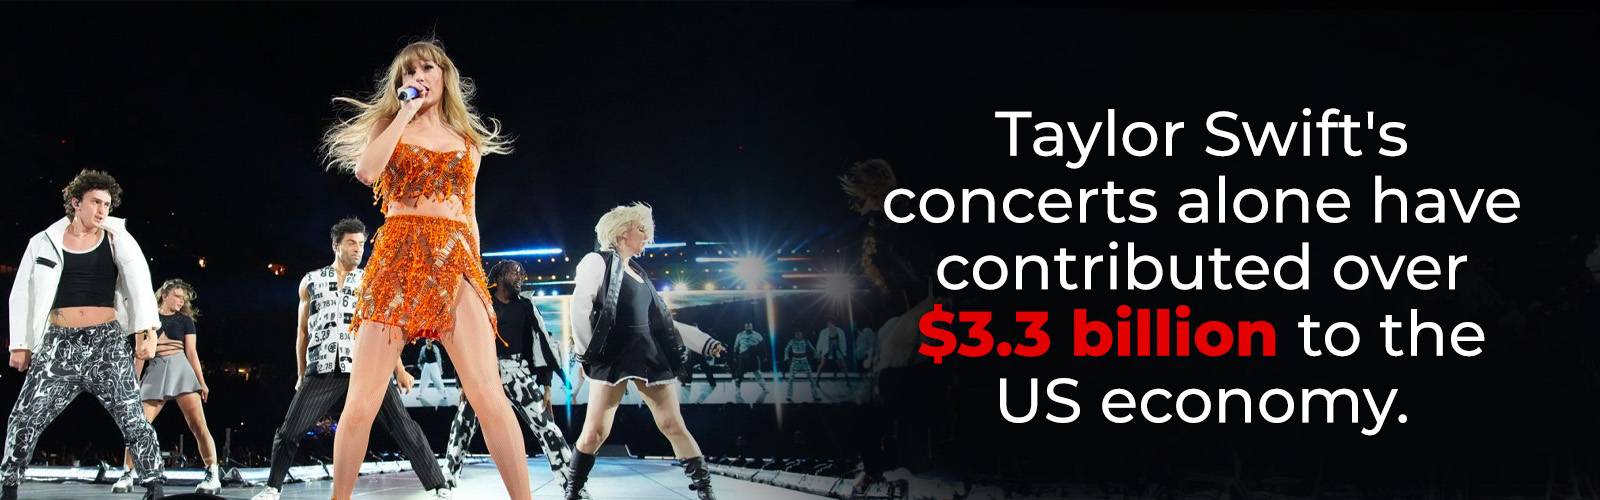 Taylor Swift's concerts contribution to the US economy